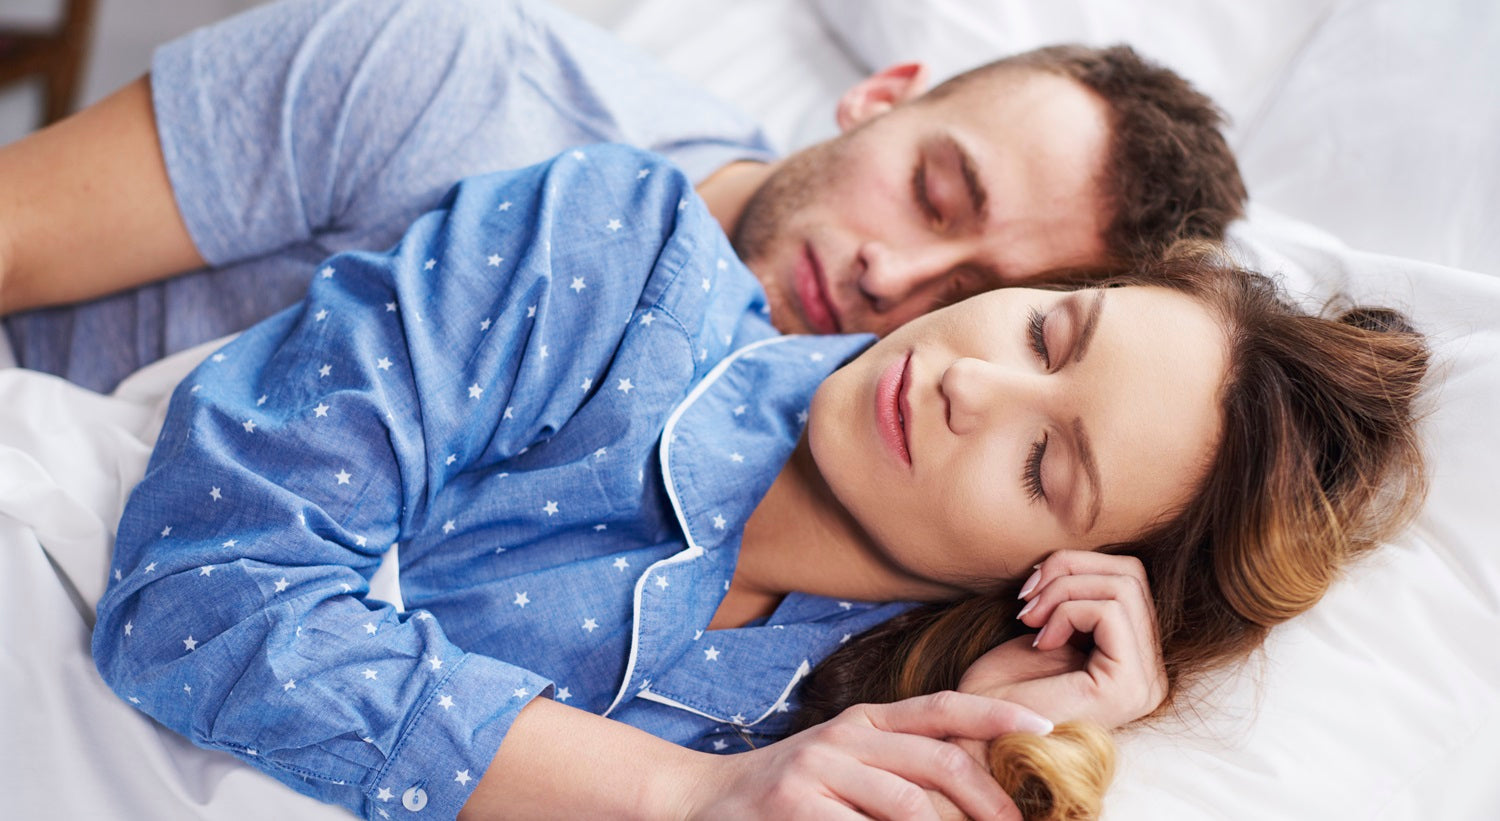 How to Sleep Peacefully with a Snoring Partner